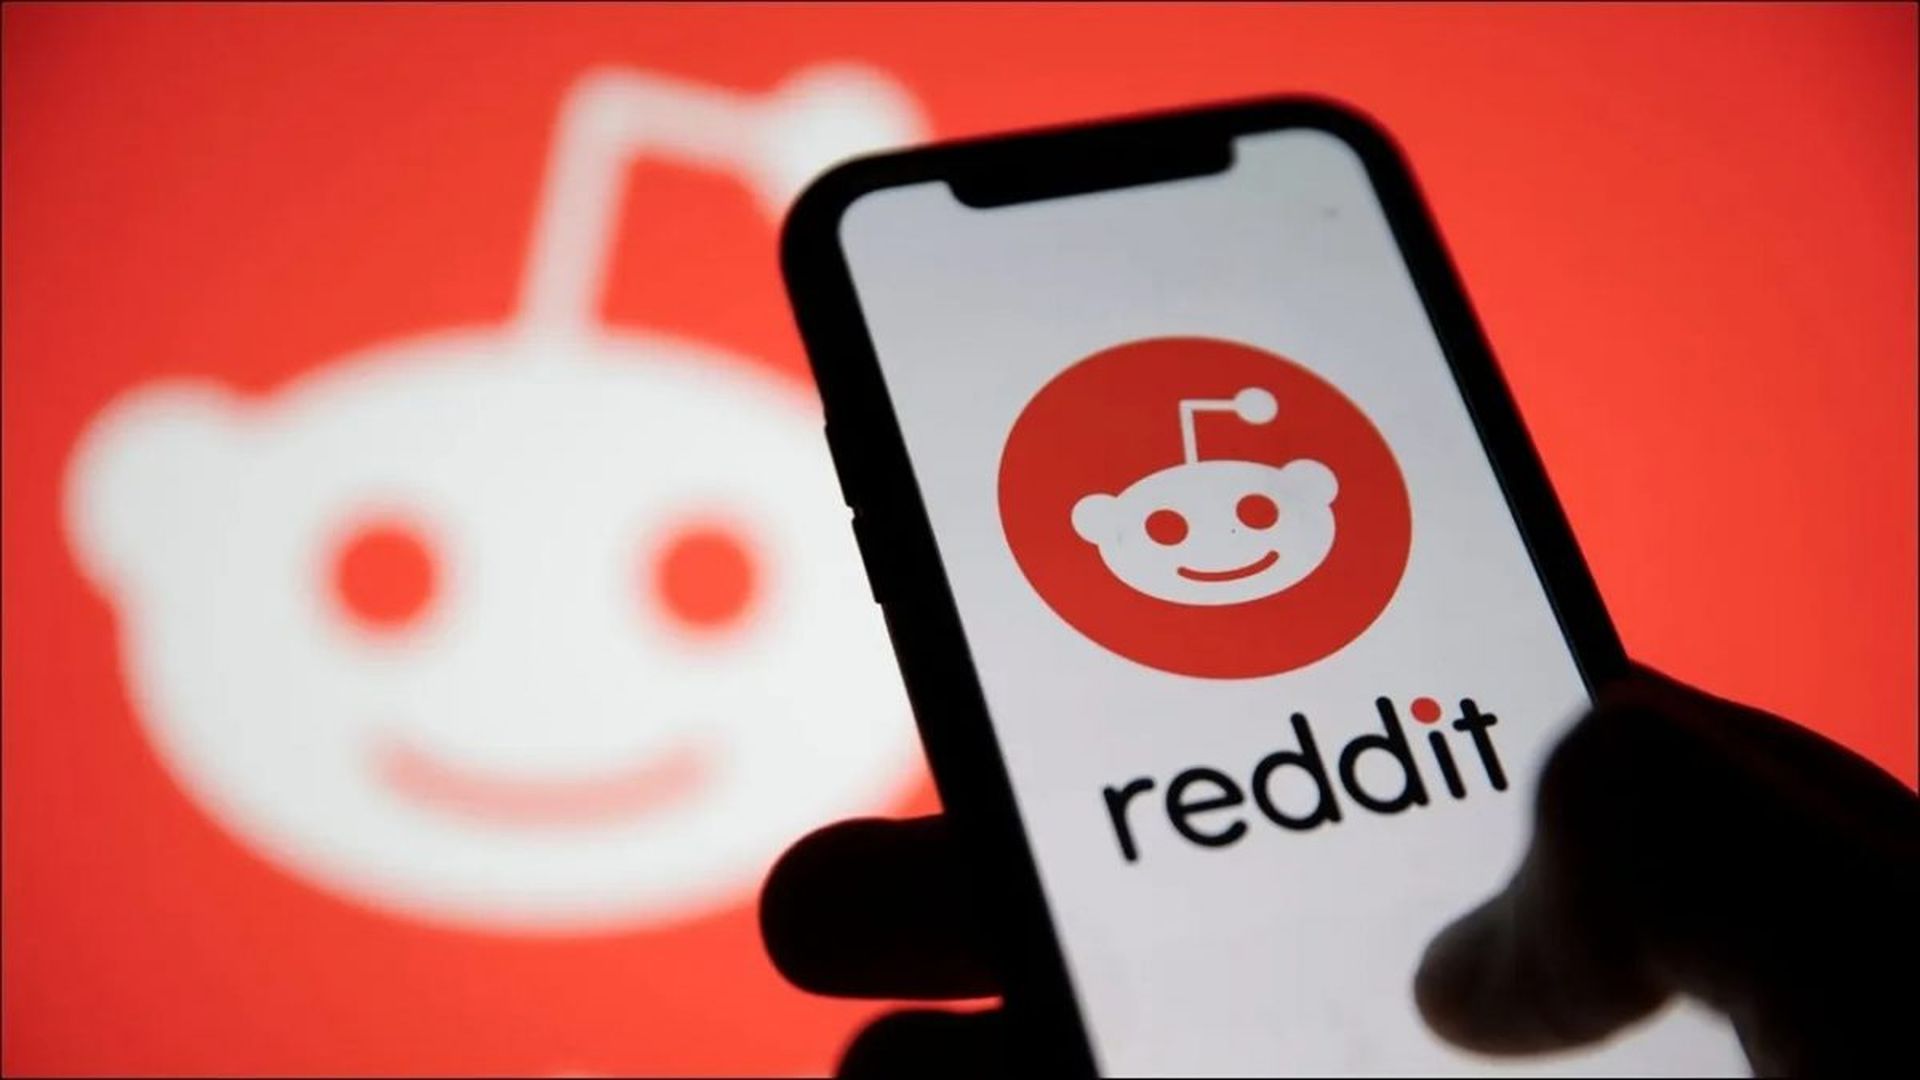 In this article, we are going to be covering how to mute subreddits on Reddit, which now you can do thanks to a fresh update on the Reddit apps.